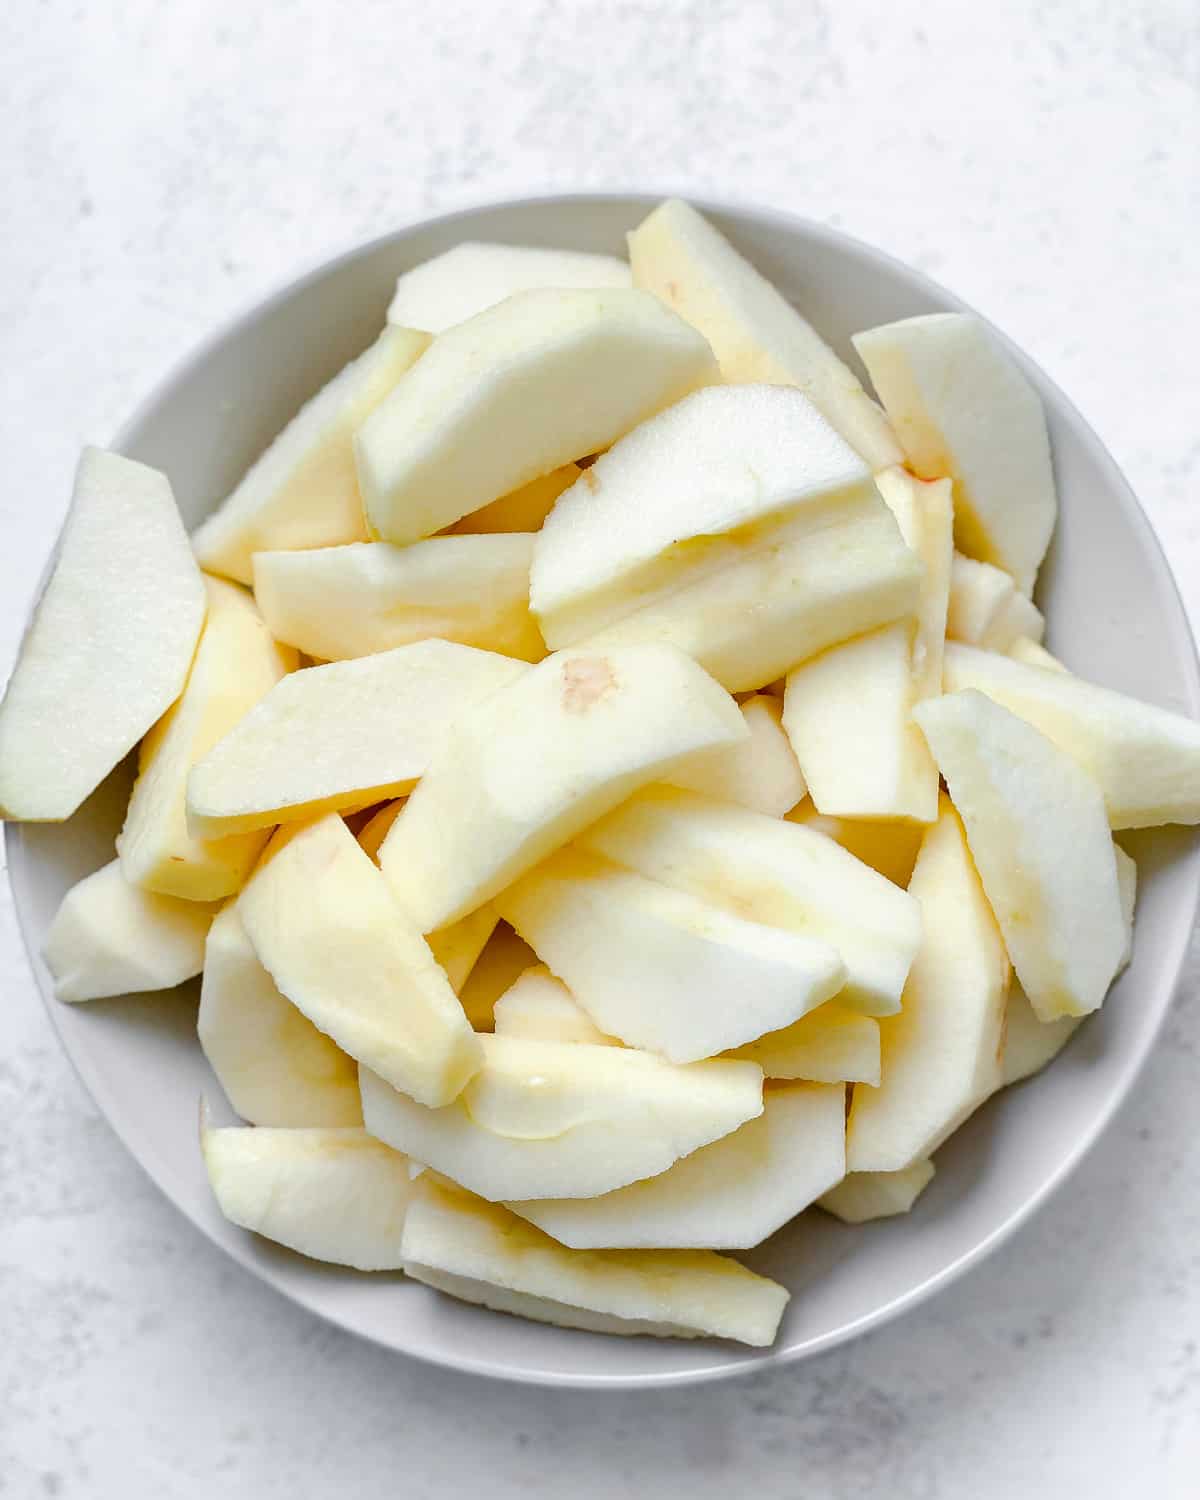 sliced apples in a white bowl against a white background